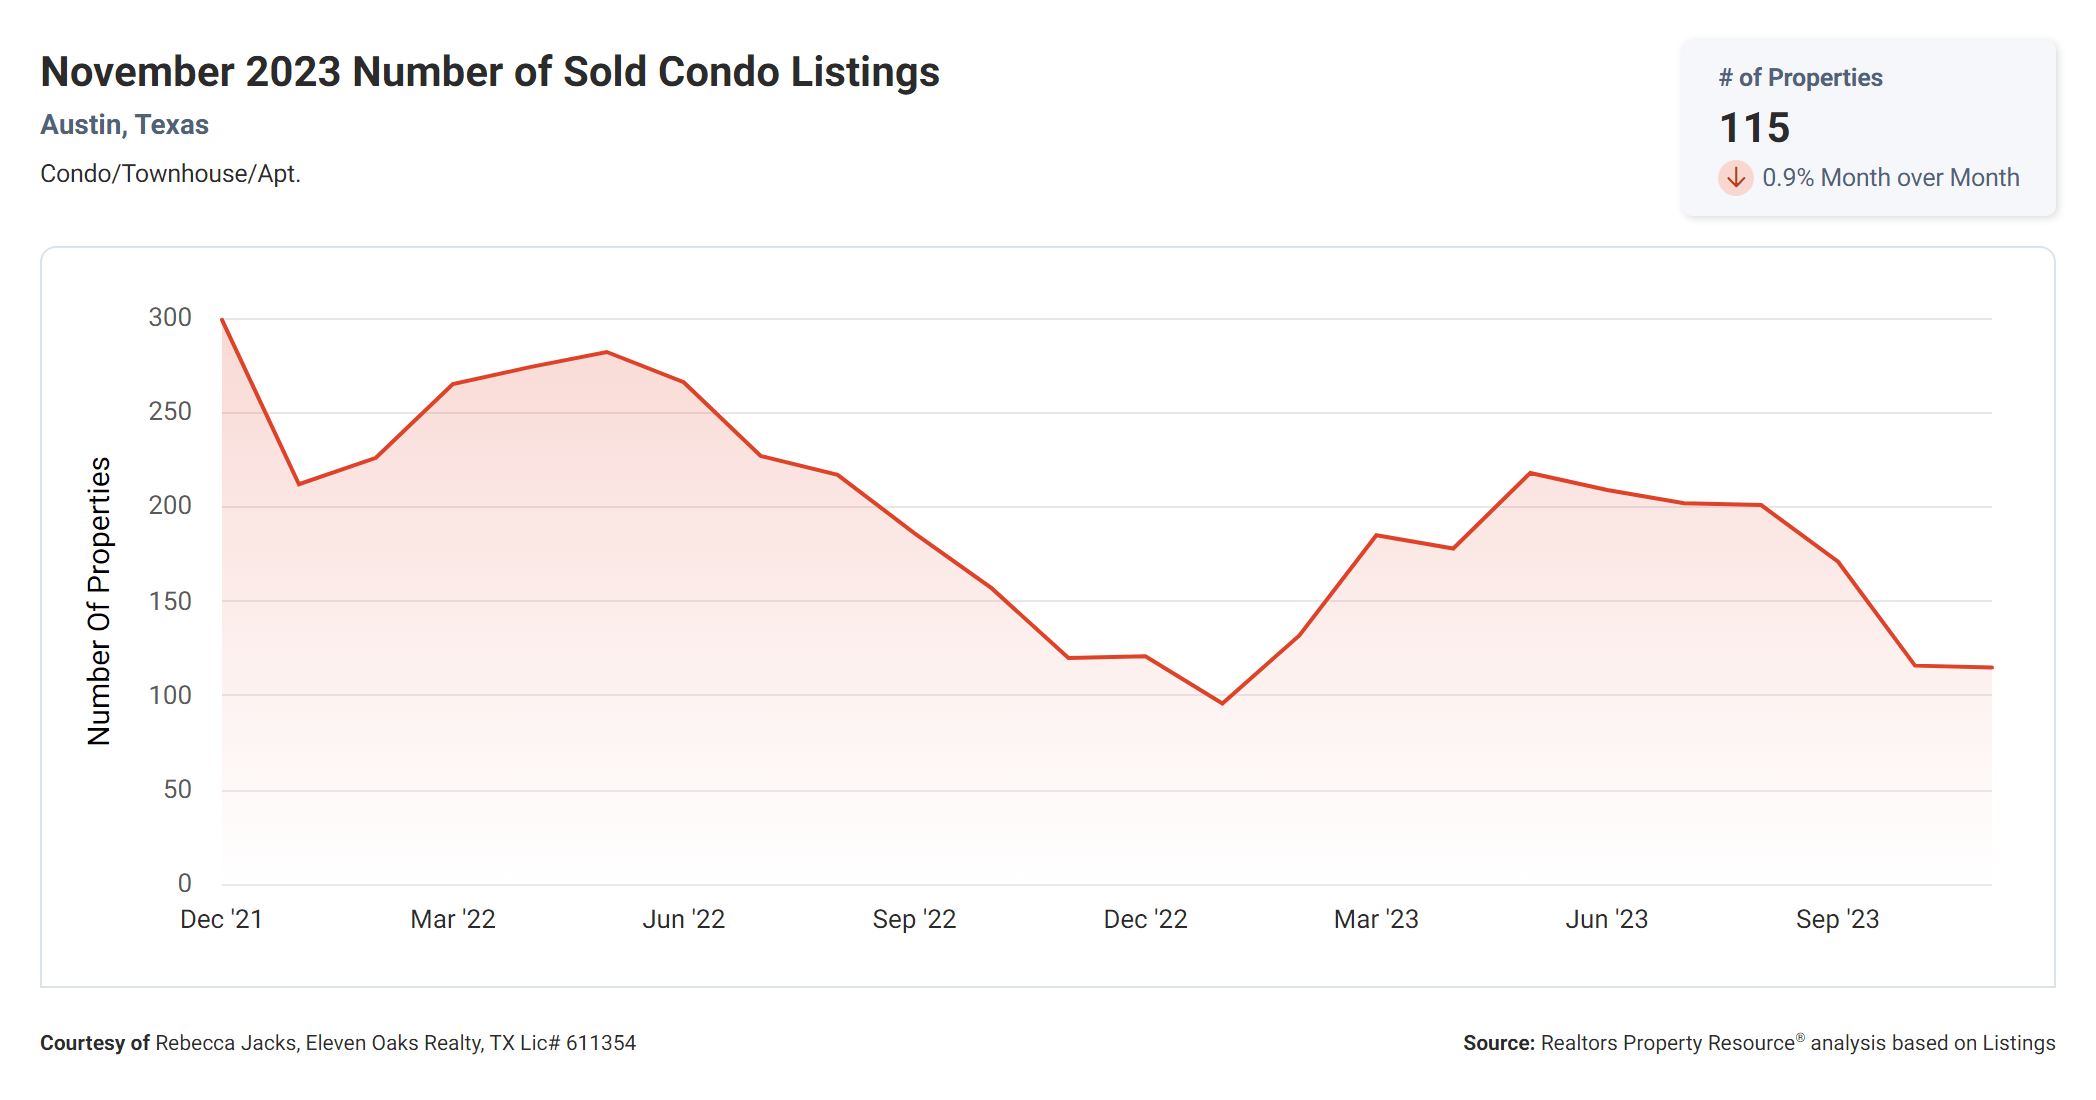 November 2023 number of sold Austin condo listings